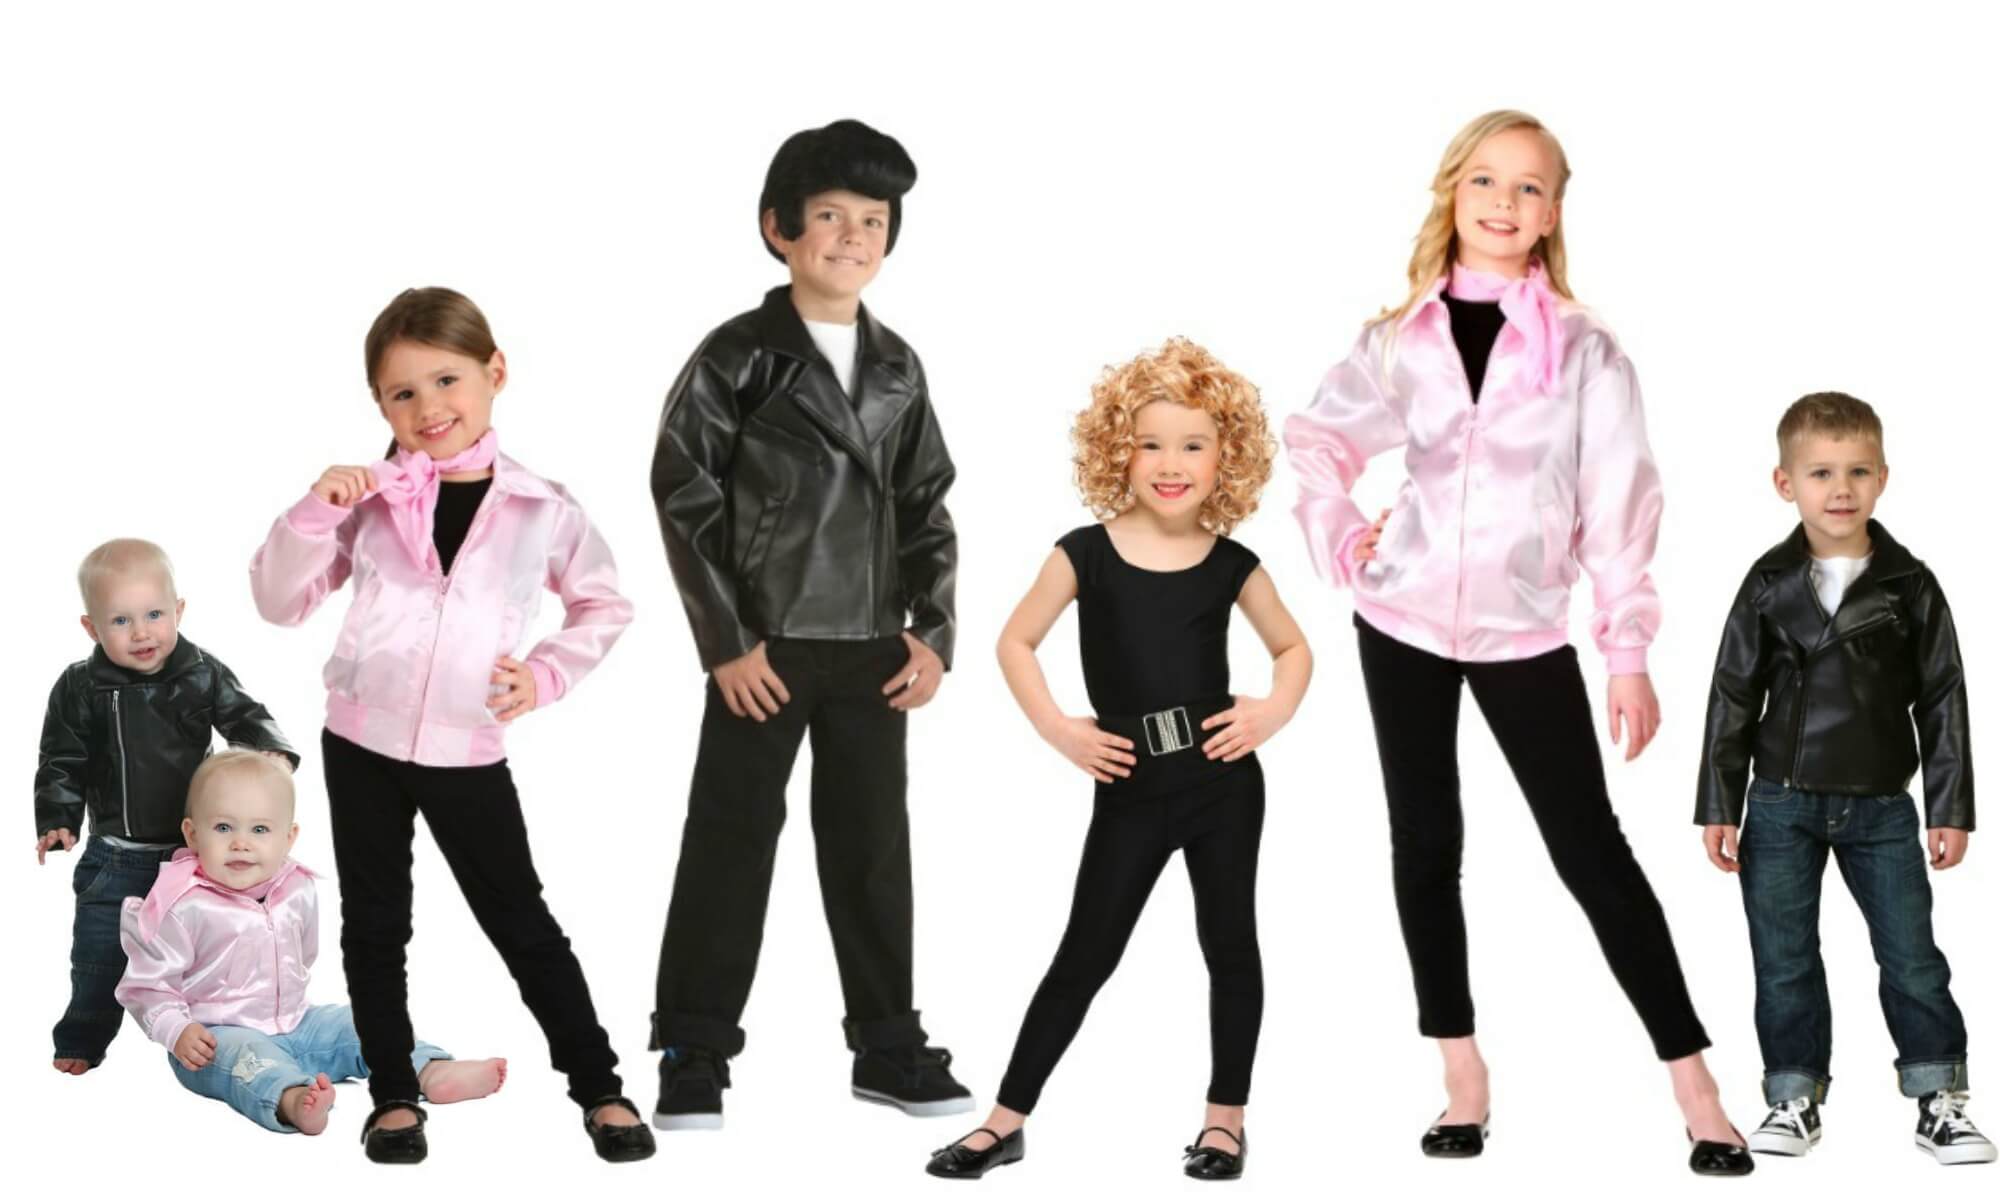 Grease costumes for kids